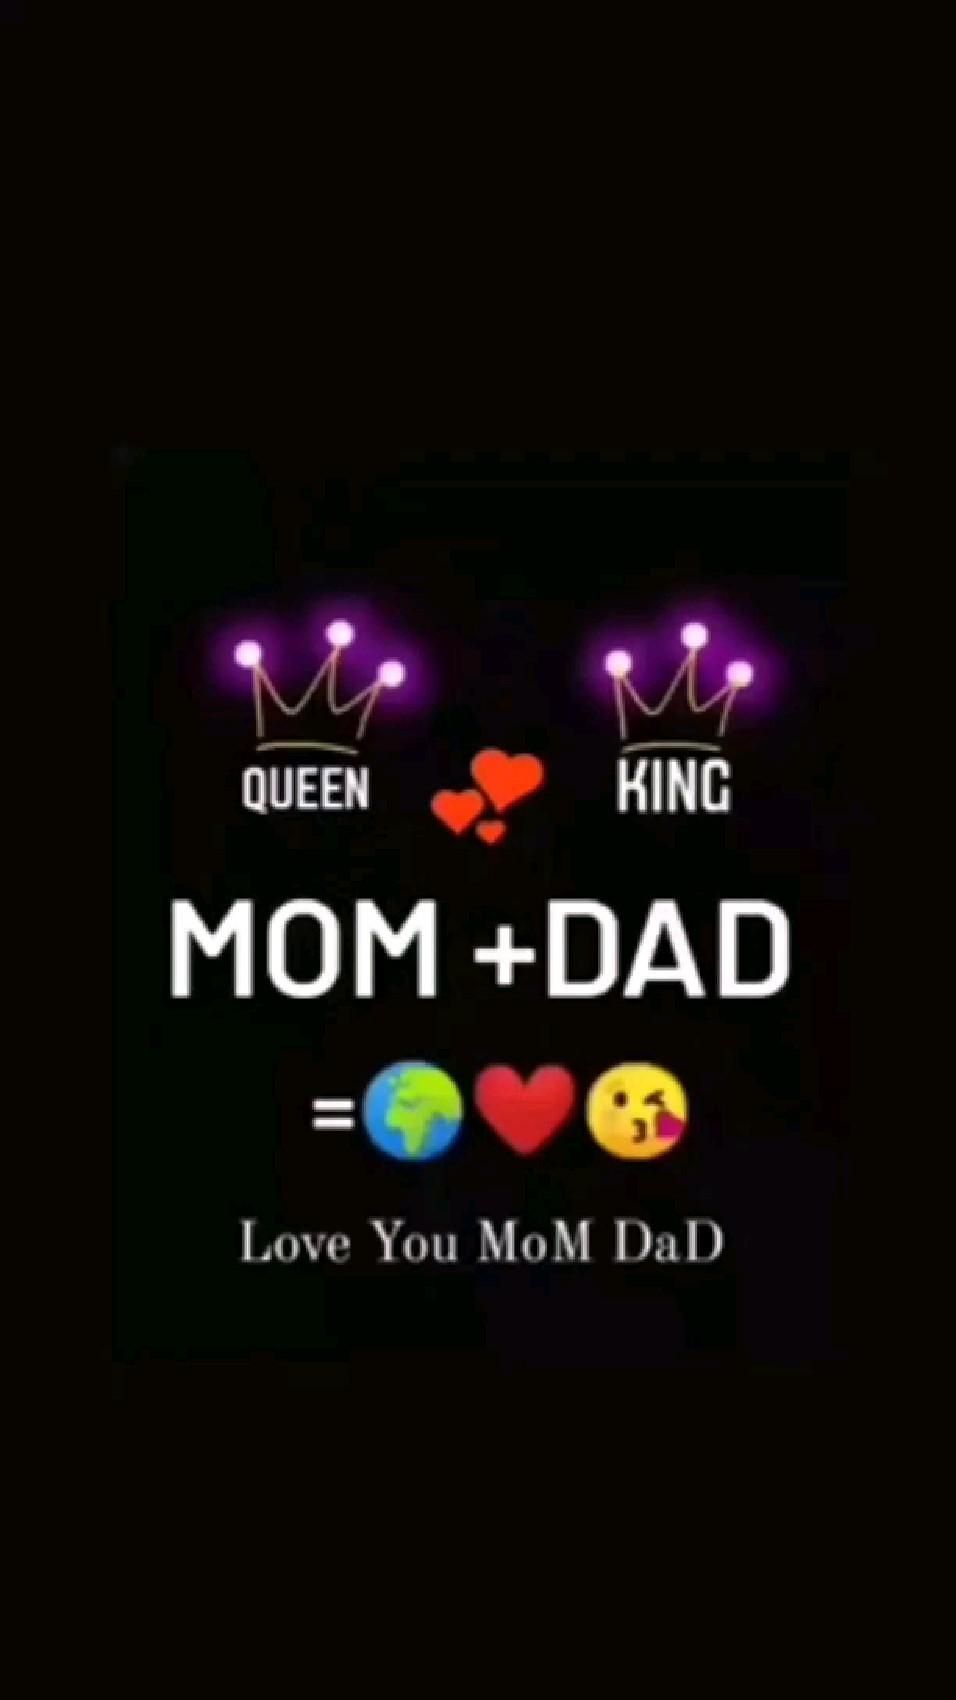 mom and dad. Proud mom quotes, Love mom quotes, Cute quotes for friends